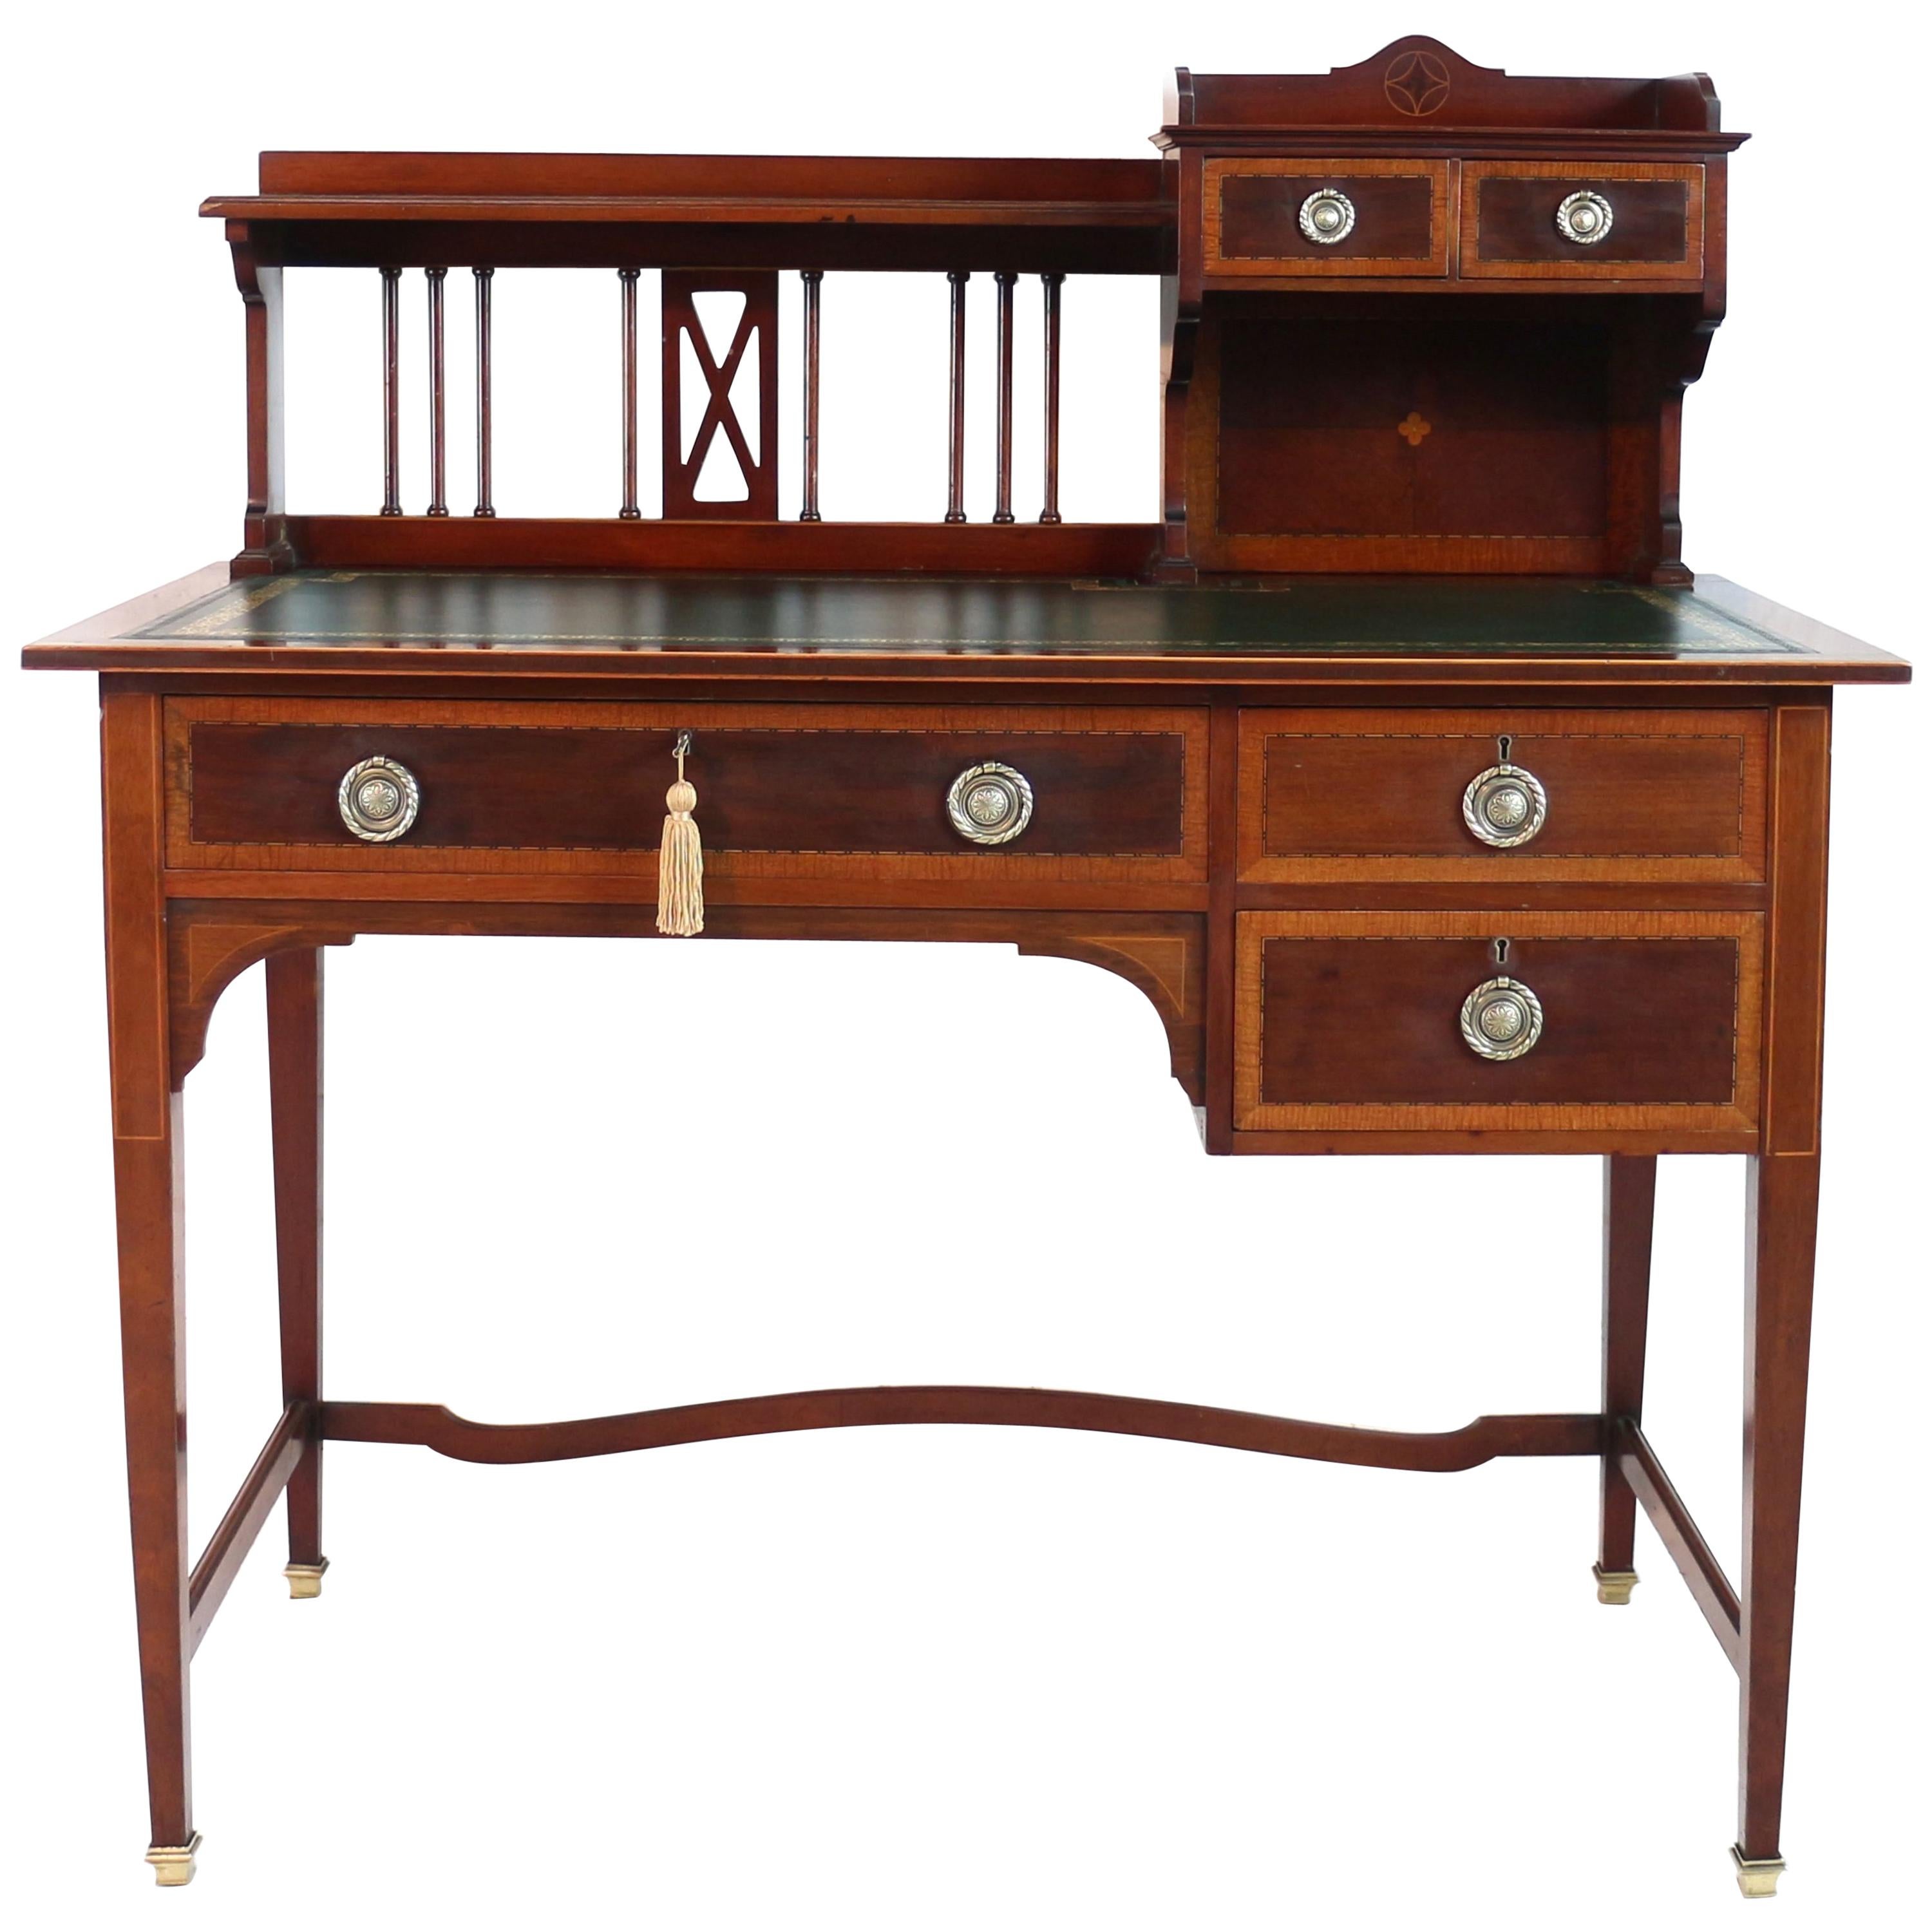 Sheraton Revival Mahogany and Inlaid Desk, Attributed to Shapland & Petter